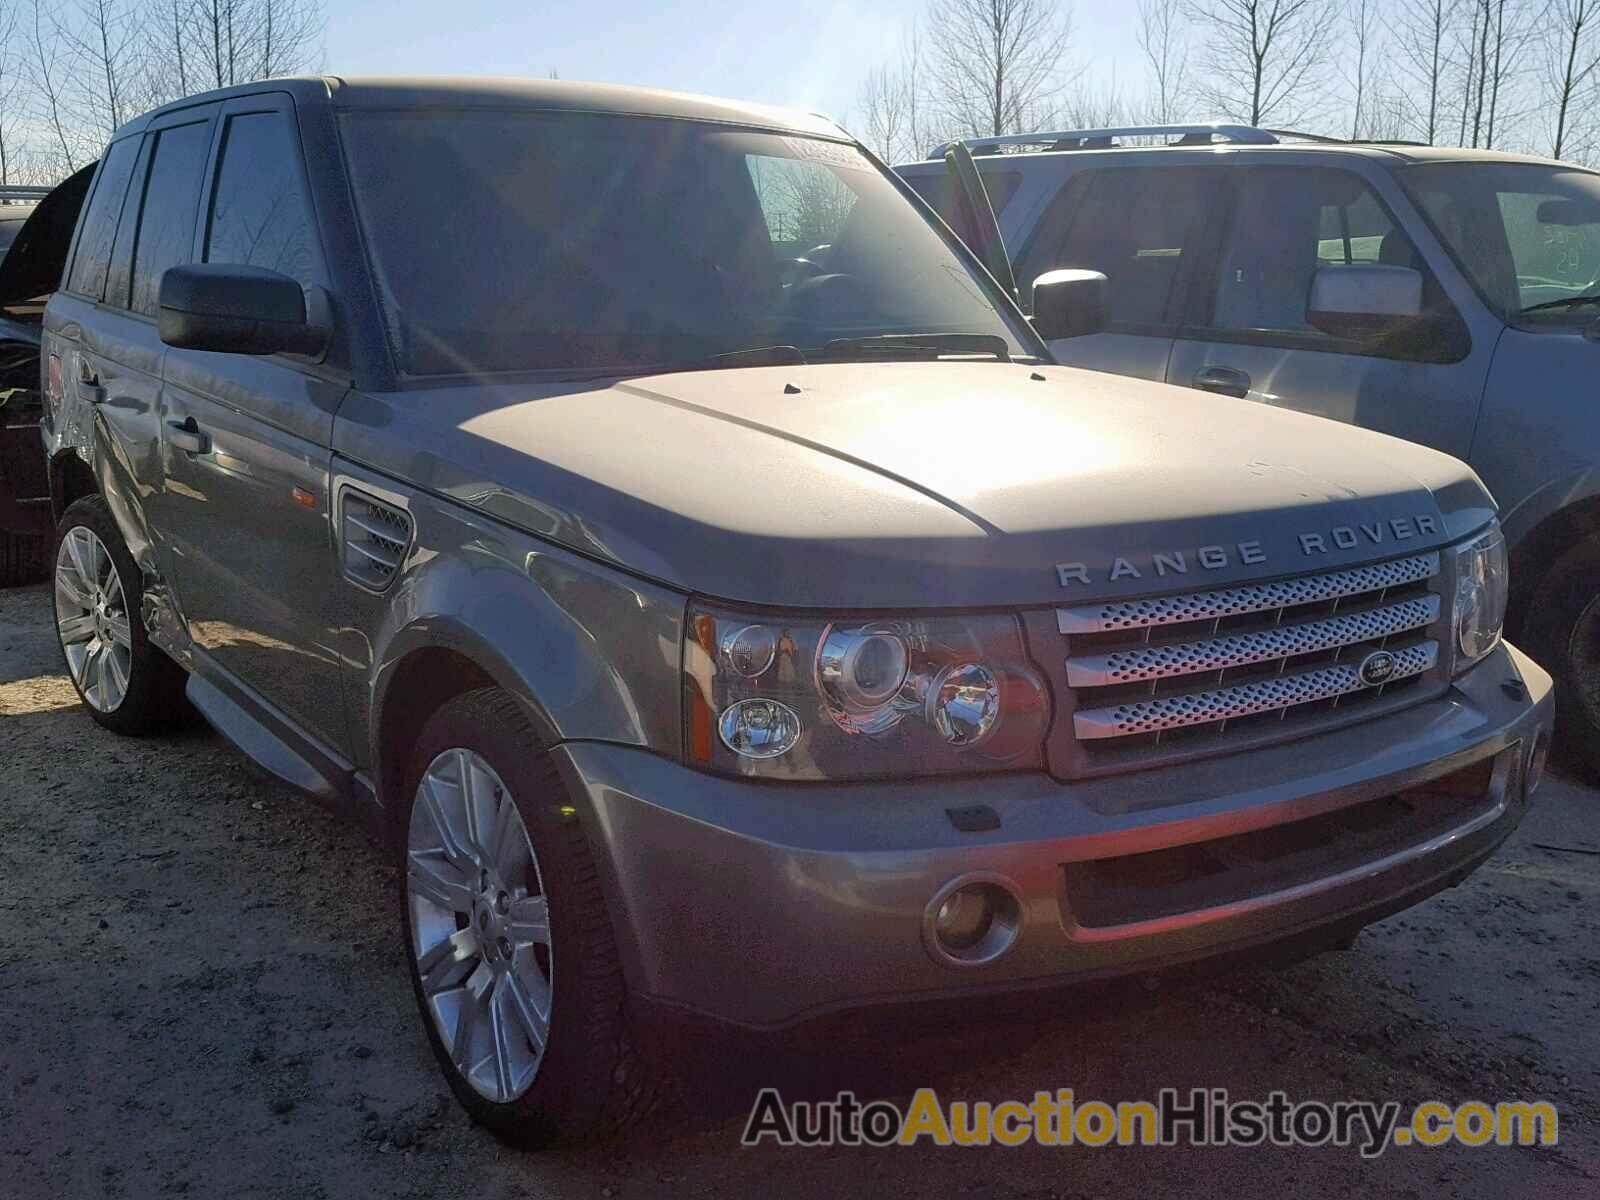 2008 LAND ROVER RANGE ROVER SPORT SUPERCHARGED, SALSH23488A176546